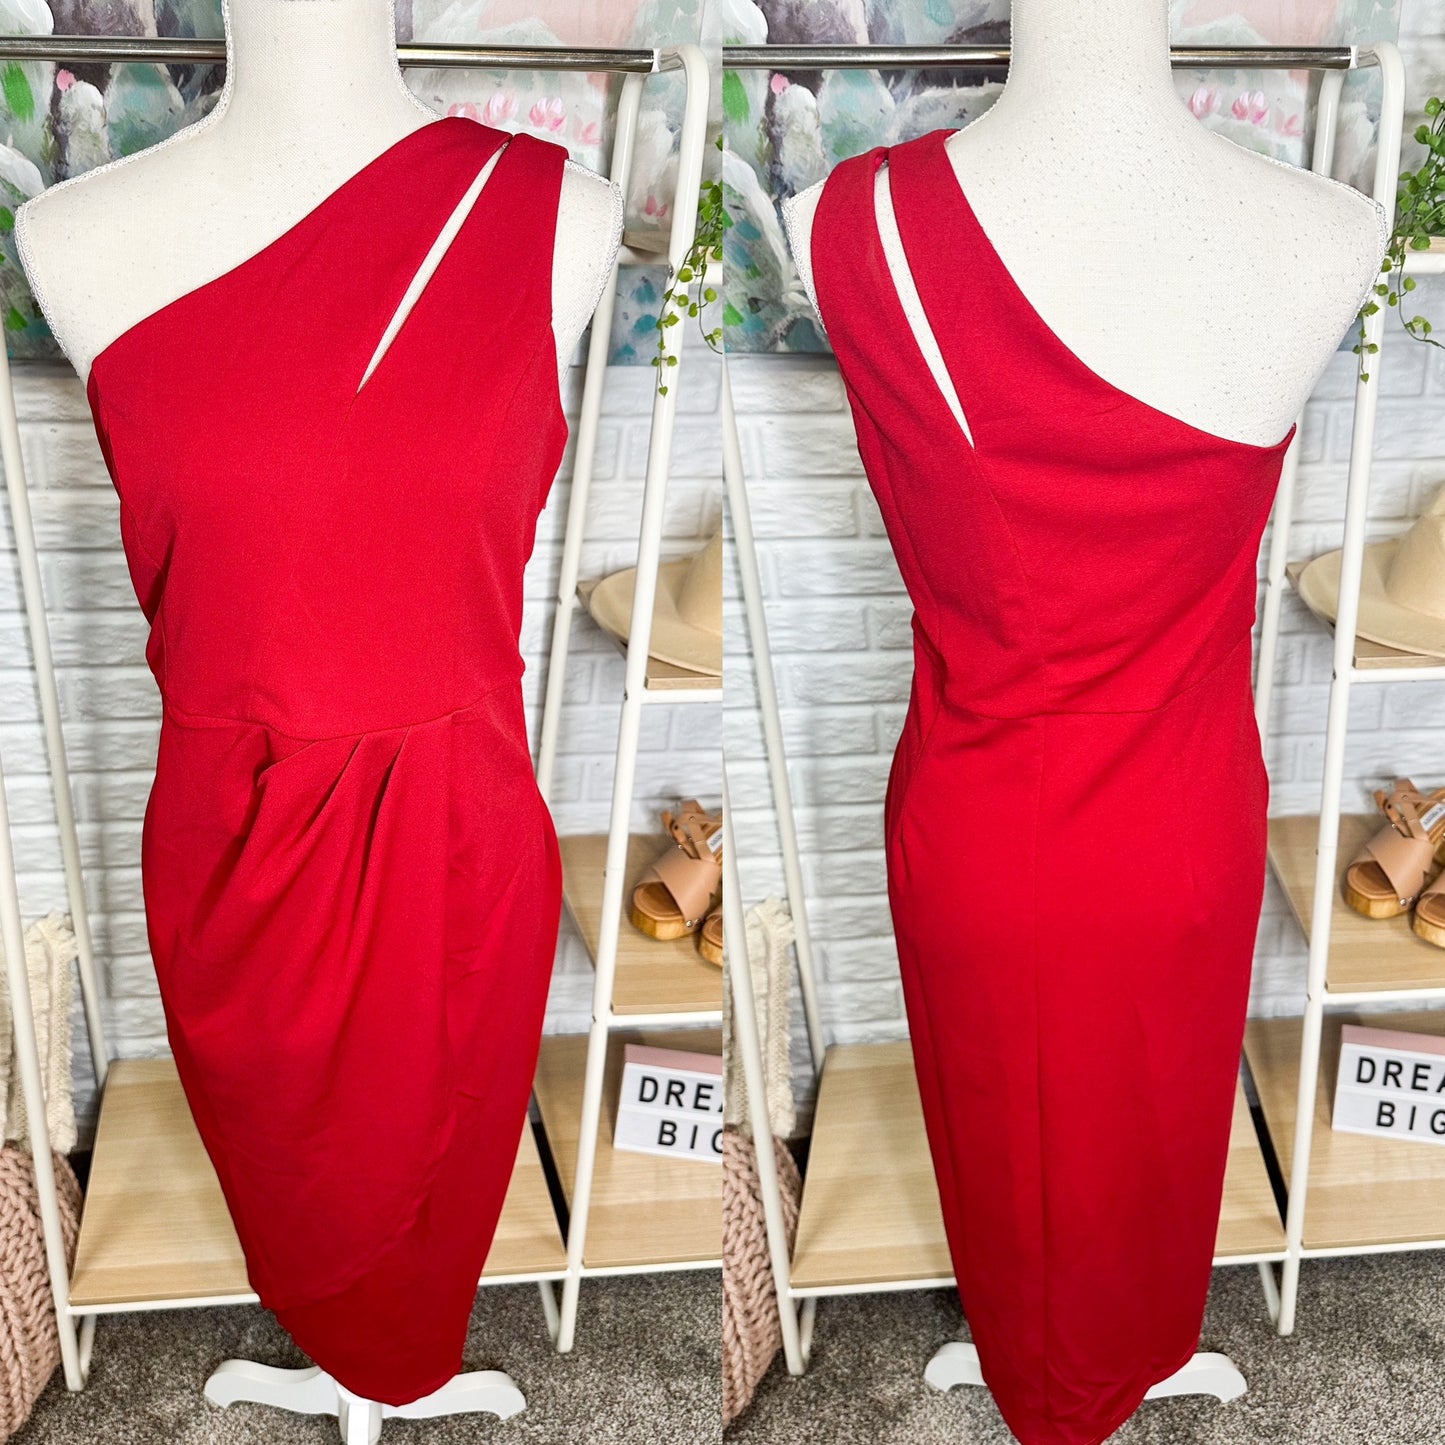 New Red One Shoulder Cutout Cocktail Dress Size Medium